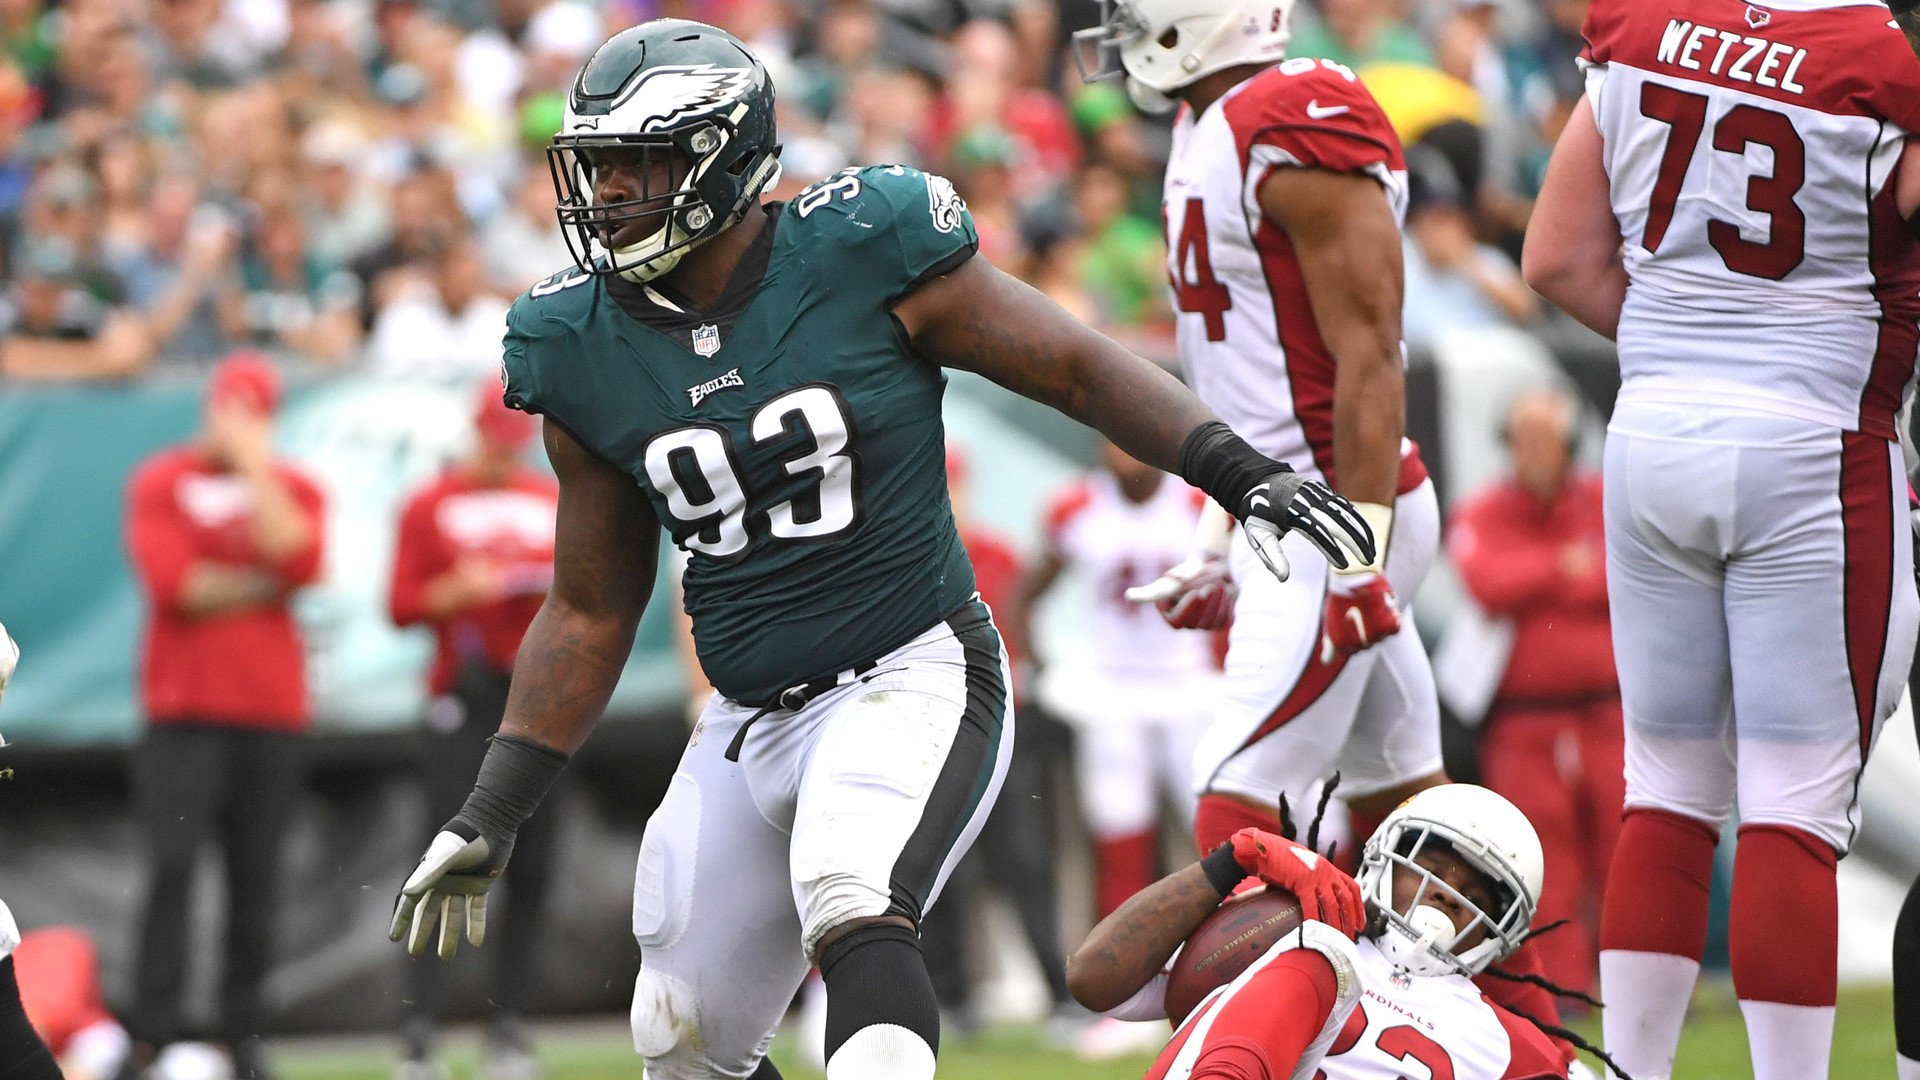 1920x1080 Tim Jernigan's hard work paying dividends with 4-year contract